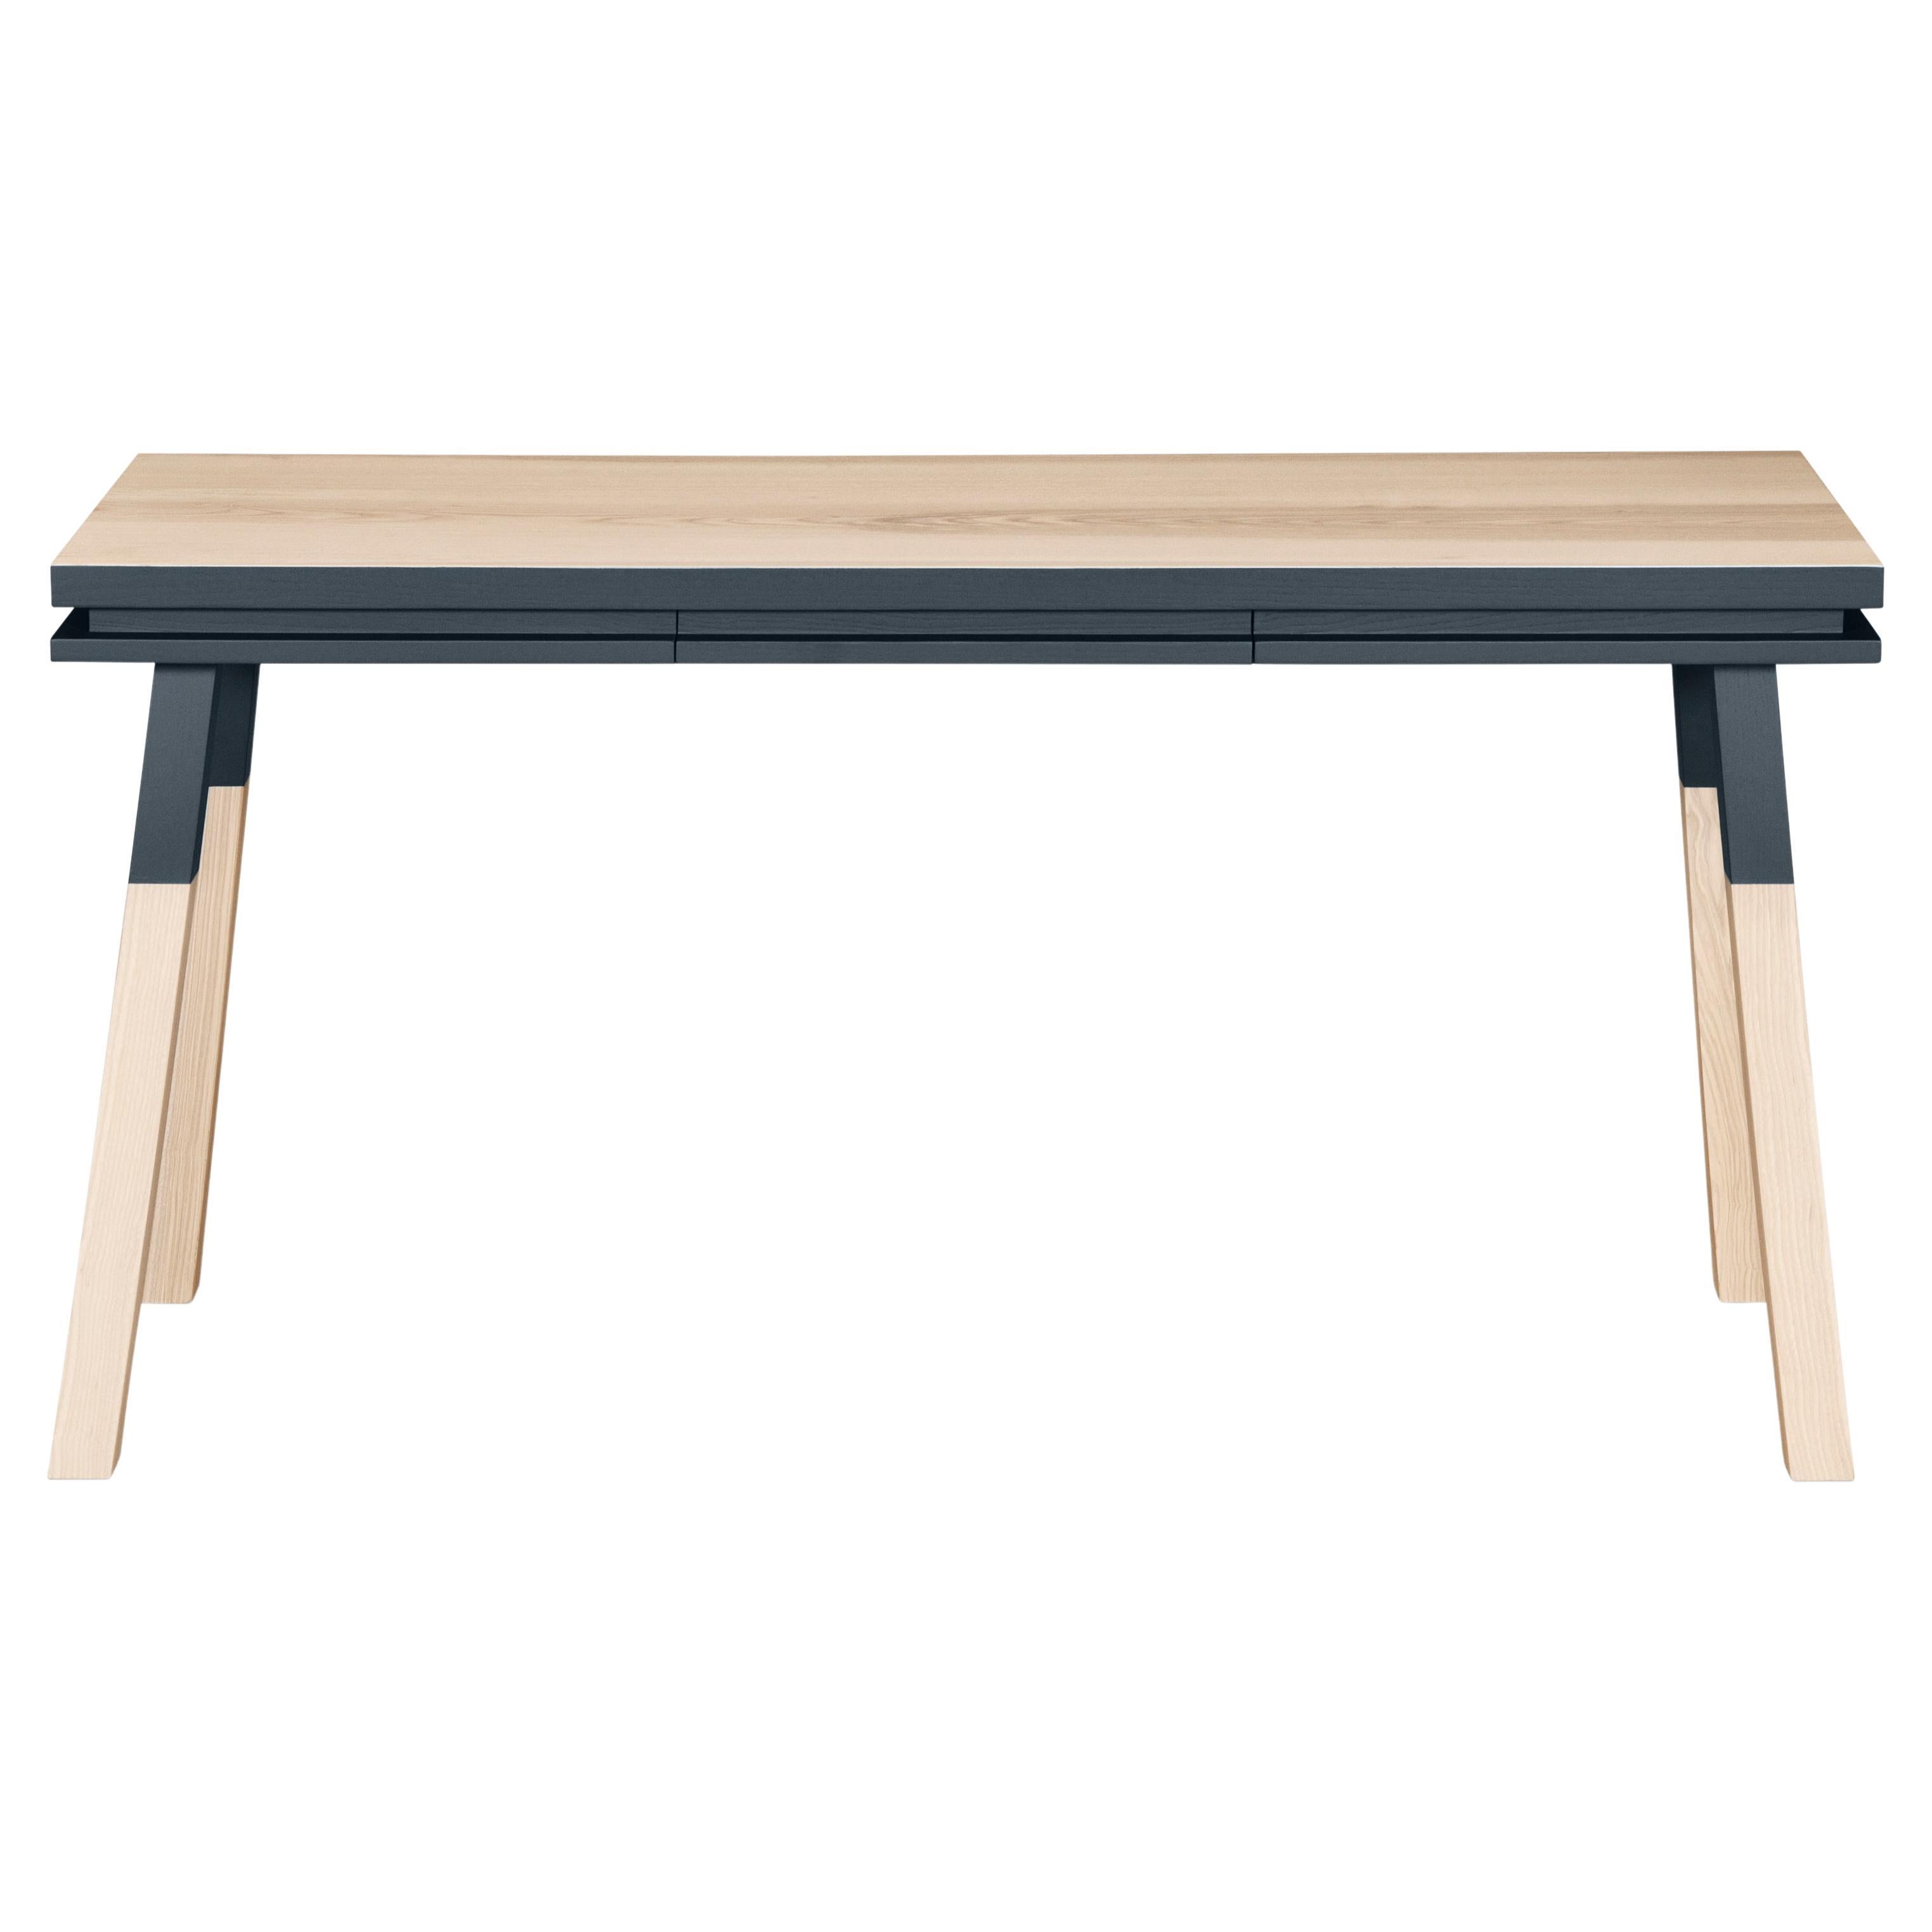 Dark Blue rectangular table in solid wood, design by Eric Gizard, Paris For Sale